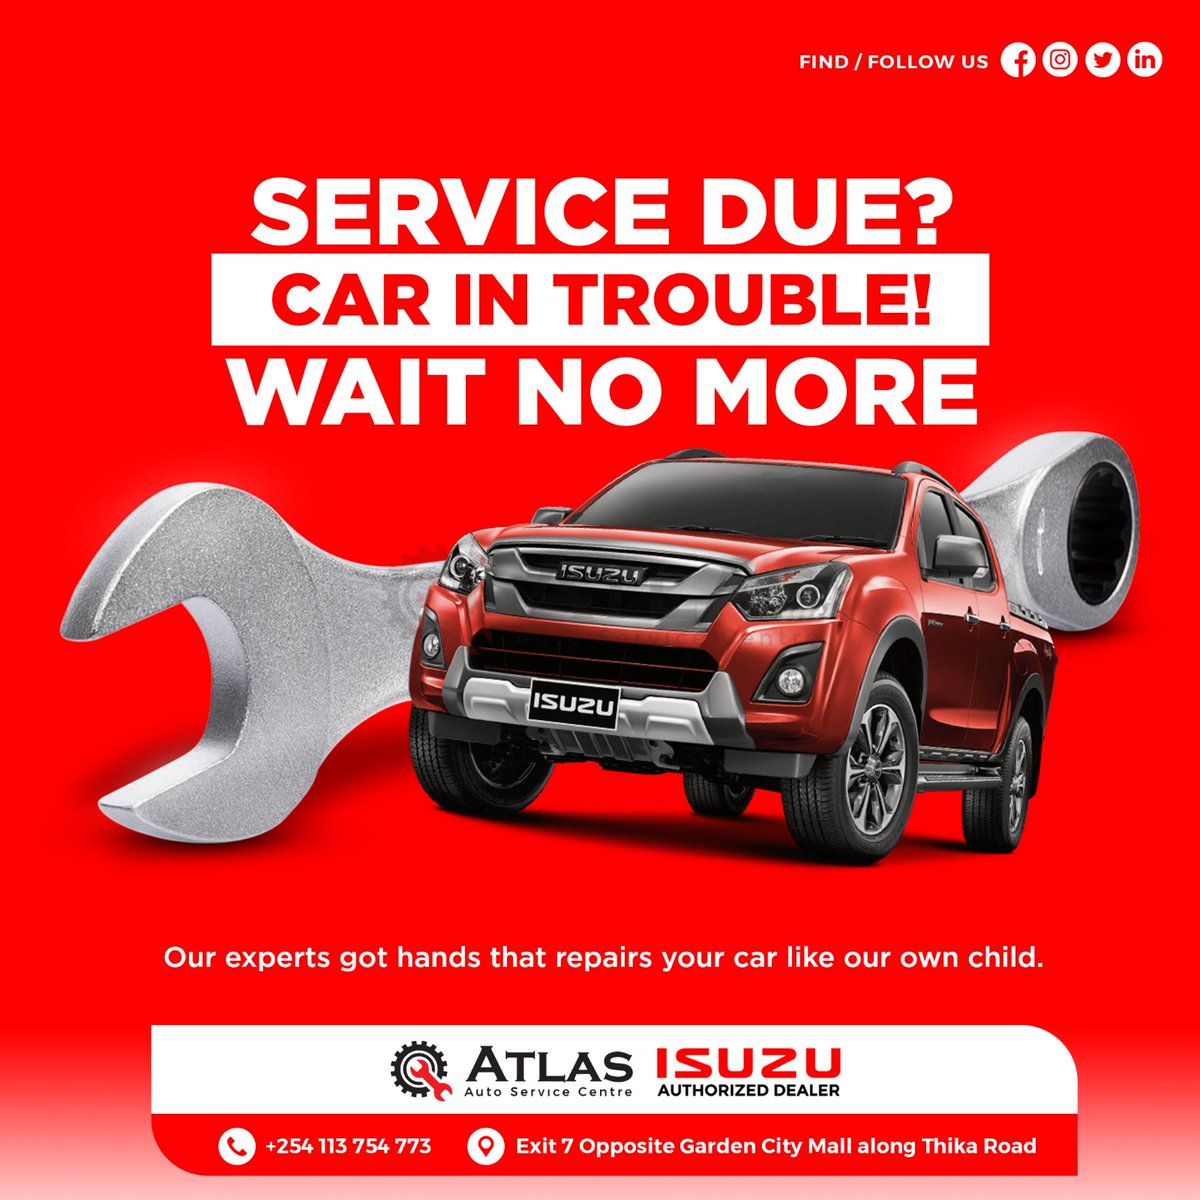 Service due? Car in trouble? Wait no more! Our experts treat your car like our own child, with hands that repair and care. Trust @Atlasautocentre to bring your ride back to life! #howcanwehelp #garage #isuzu #CarCare #ExpertHands #cera #floods #earthquake